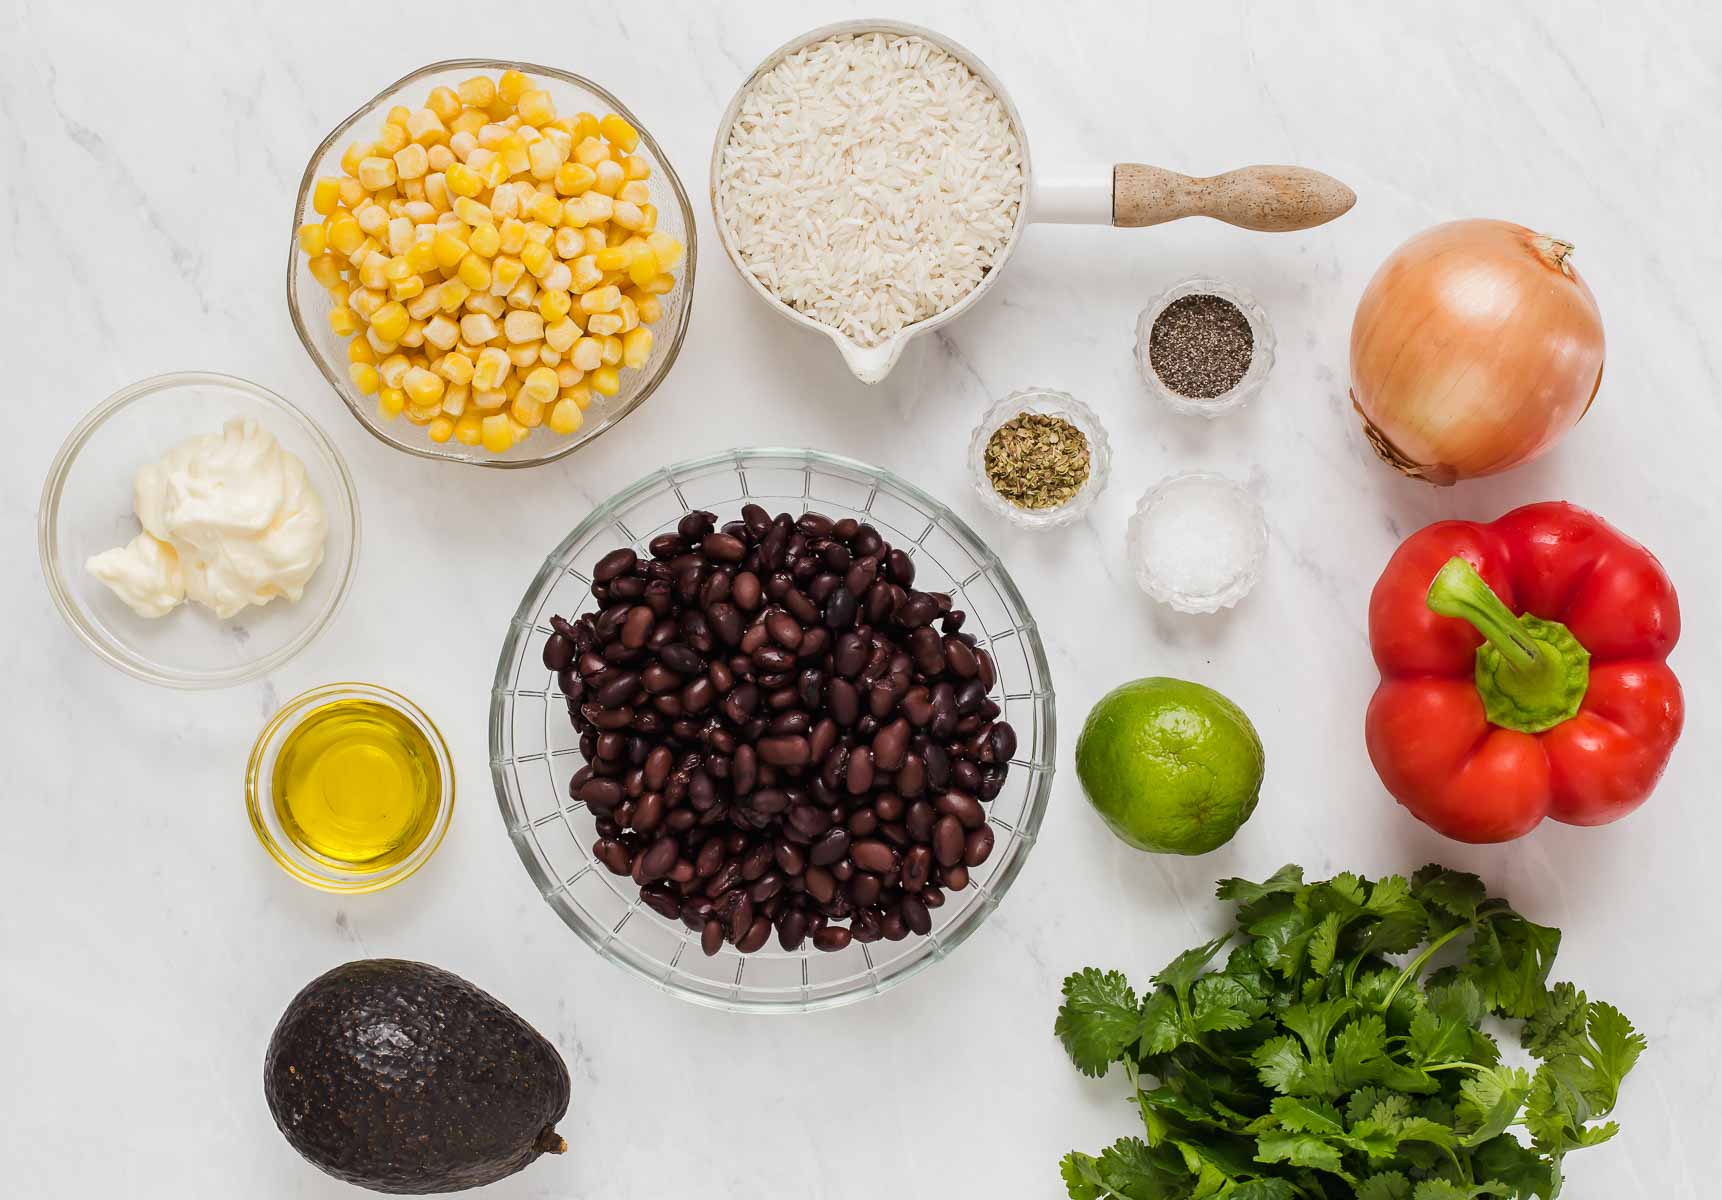 Black beans, corn, and salsa ingredients in bowls on white table.